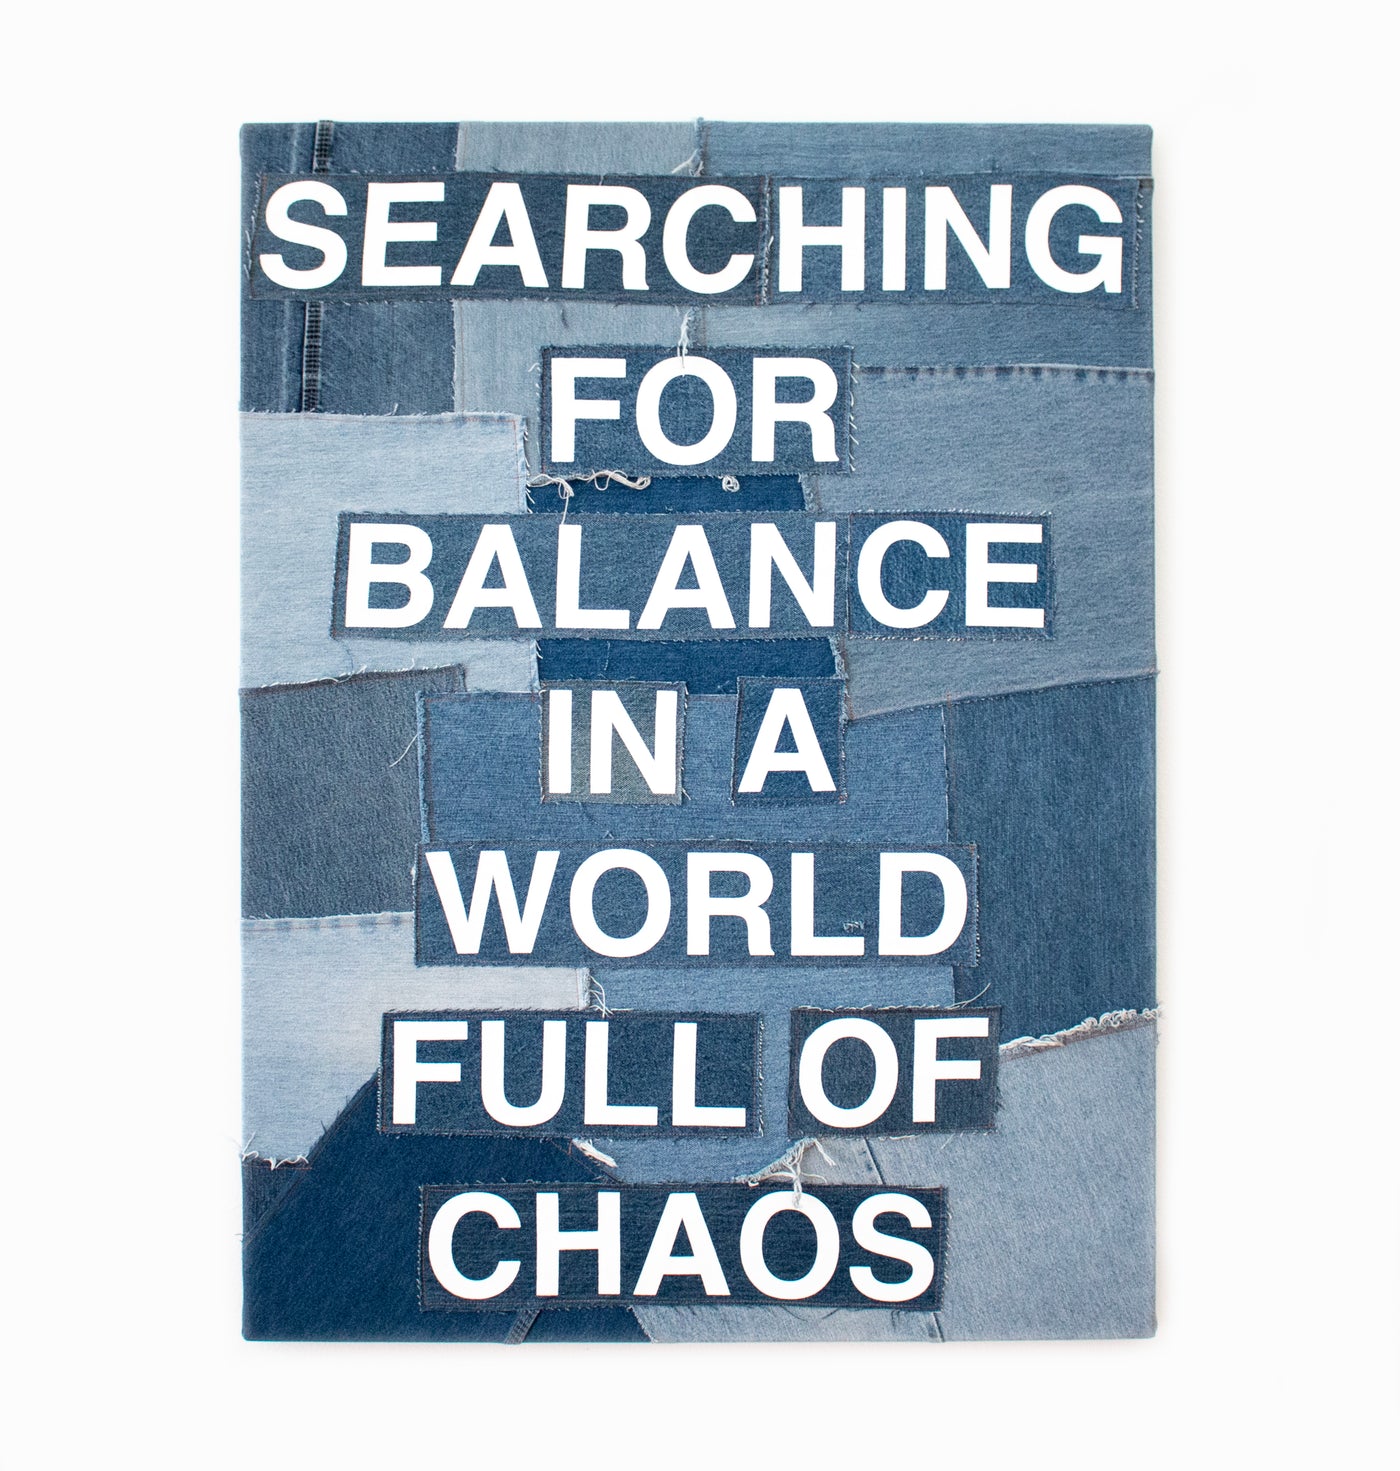 Searching For Balance In A World of Chaos